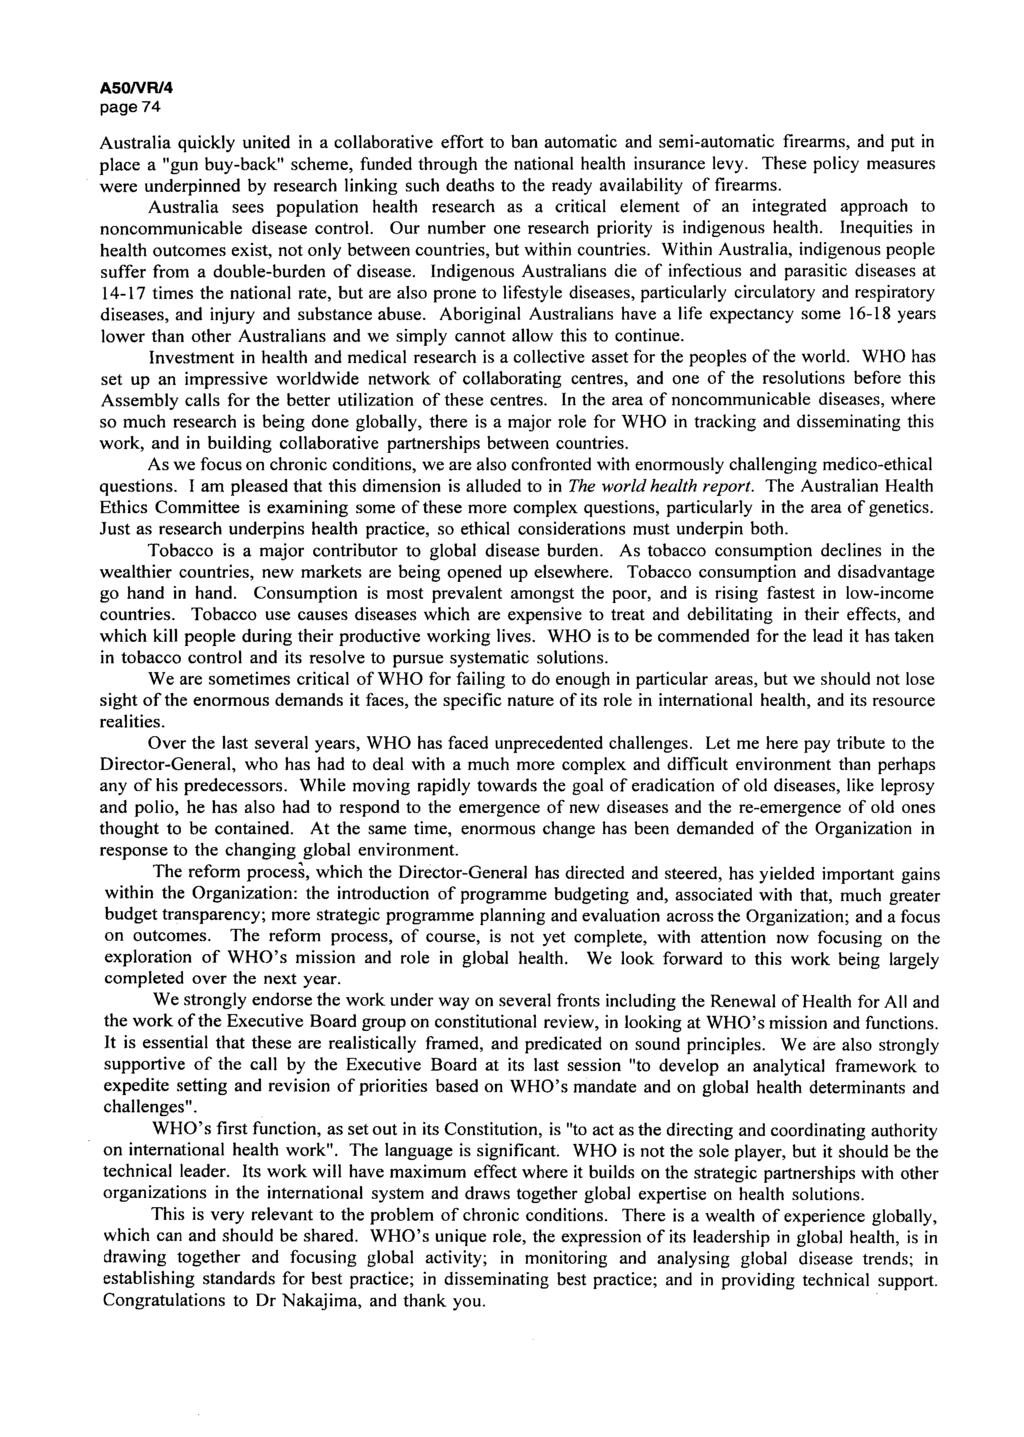 A50/VR/5 page 74 Australia quickly united in a collaborative effort to ban automatic and semi-automatic firearms, and put in place a "gun buy-back" scheme, funded through the national health